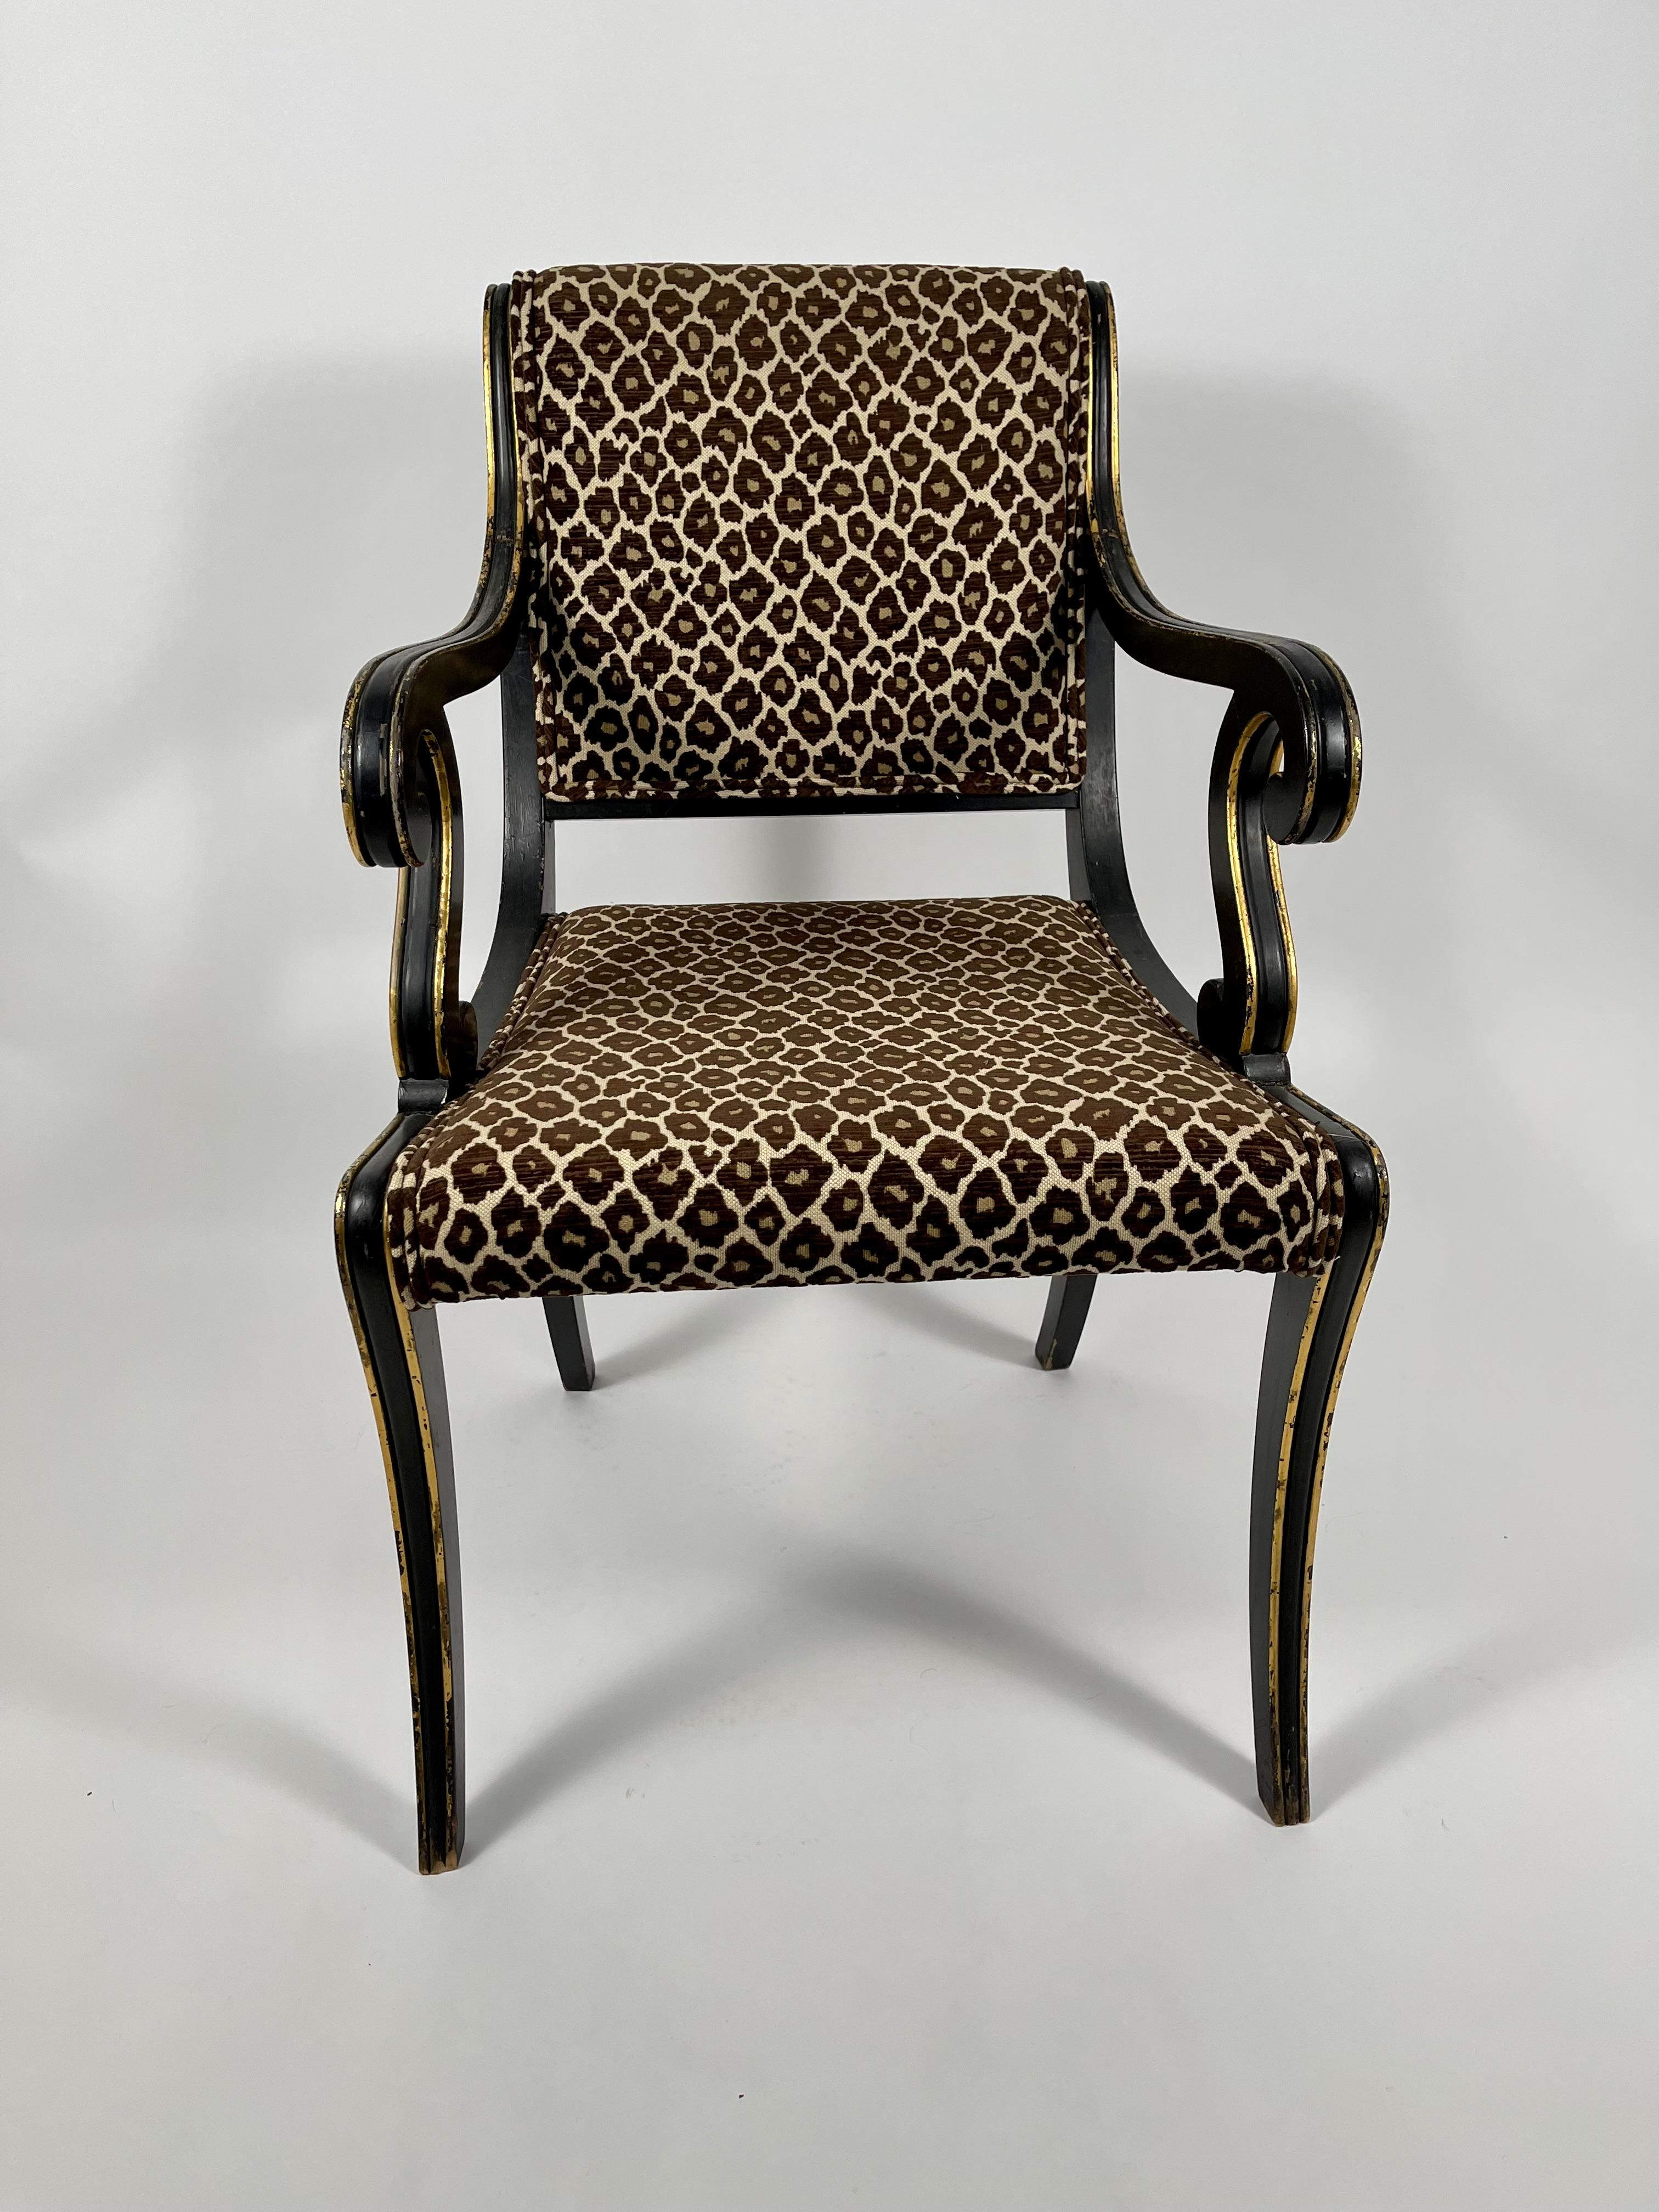 A Regency neoclassical style open arm chair, ebonized wood with parcel-gilt decoration, the upholstered back with curved crest rail and scrolled down swept arms, with upholstered seat supported by gently curving saber leg, headed with gilt brass